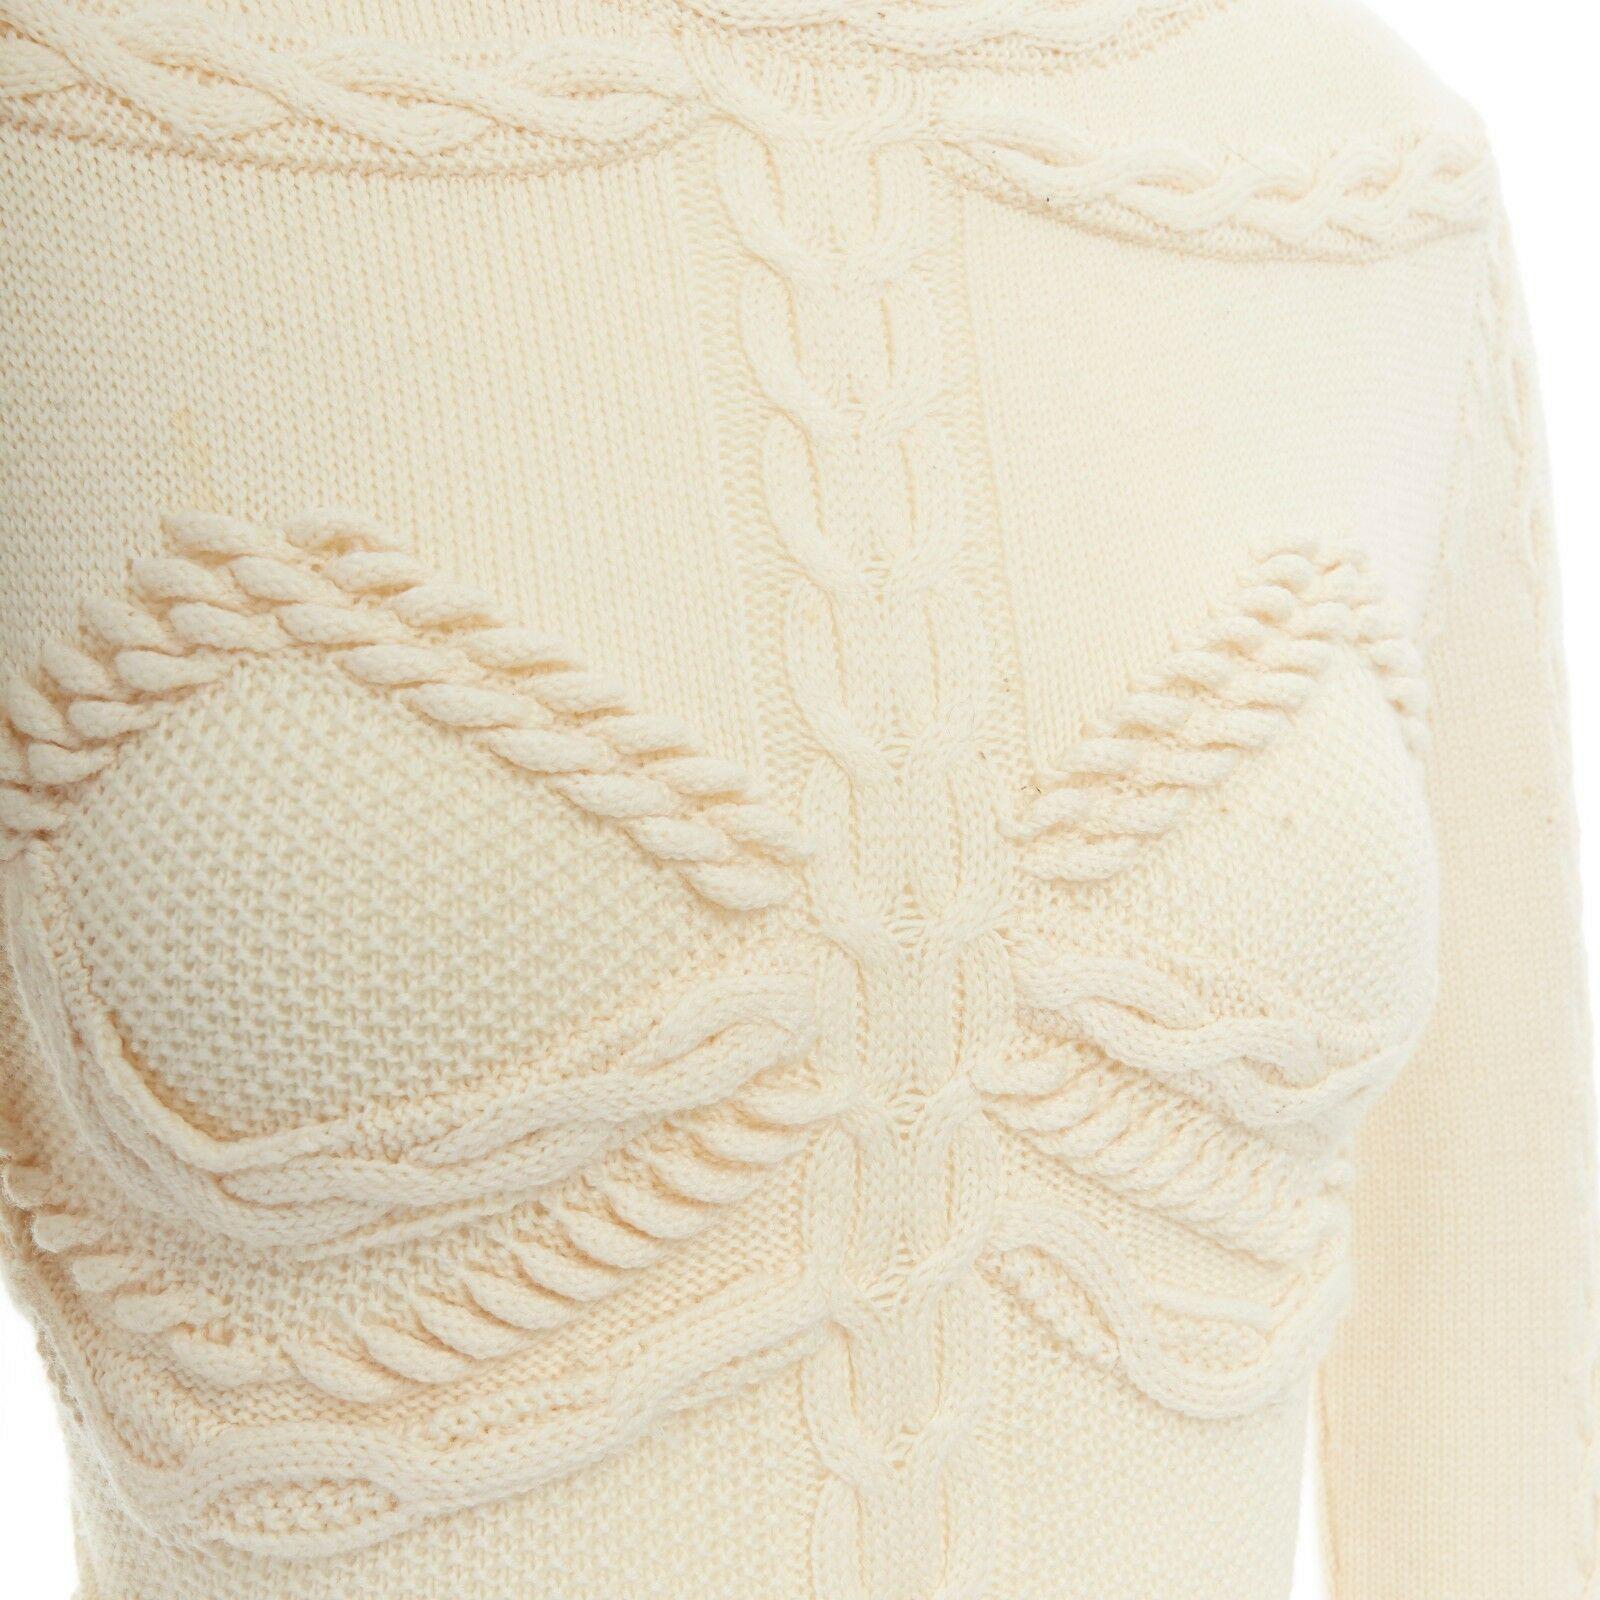 ALEXANDER MCQUEEN cream skeleton bustier cable knit dress US0 UK6 IT38 FR34 XS

ALEXANDER MCQUEENCream wool. Textured. Skeletal spine and bustier textured cable knit. Fit flare dress. Cocktail dress. Made in Italy.

SIZING
Size reference: XS / US0 /